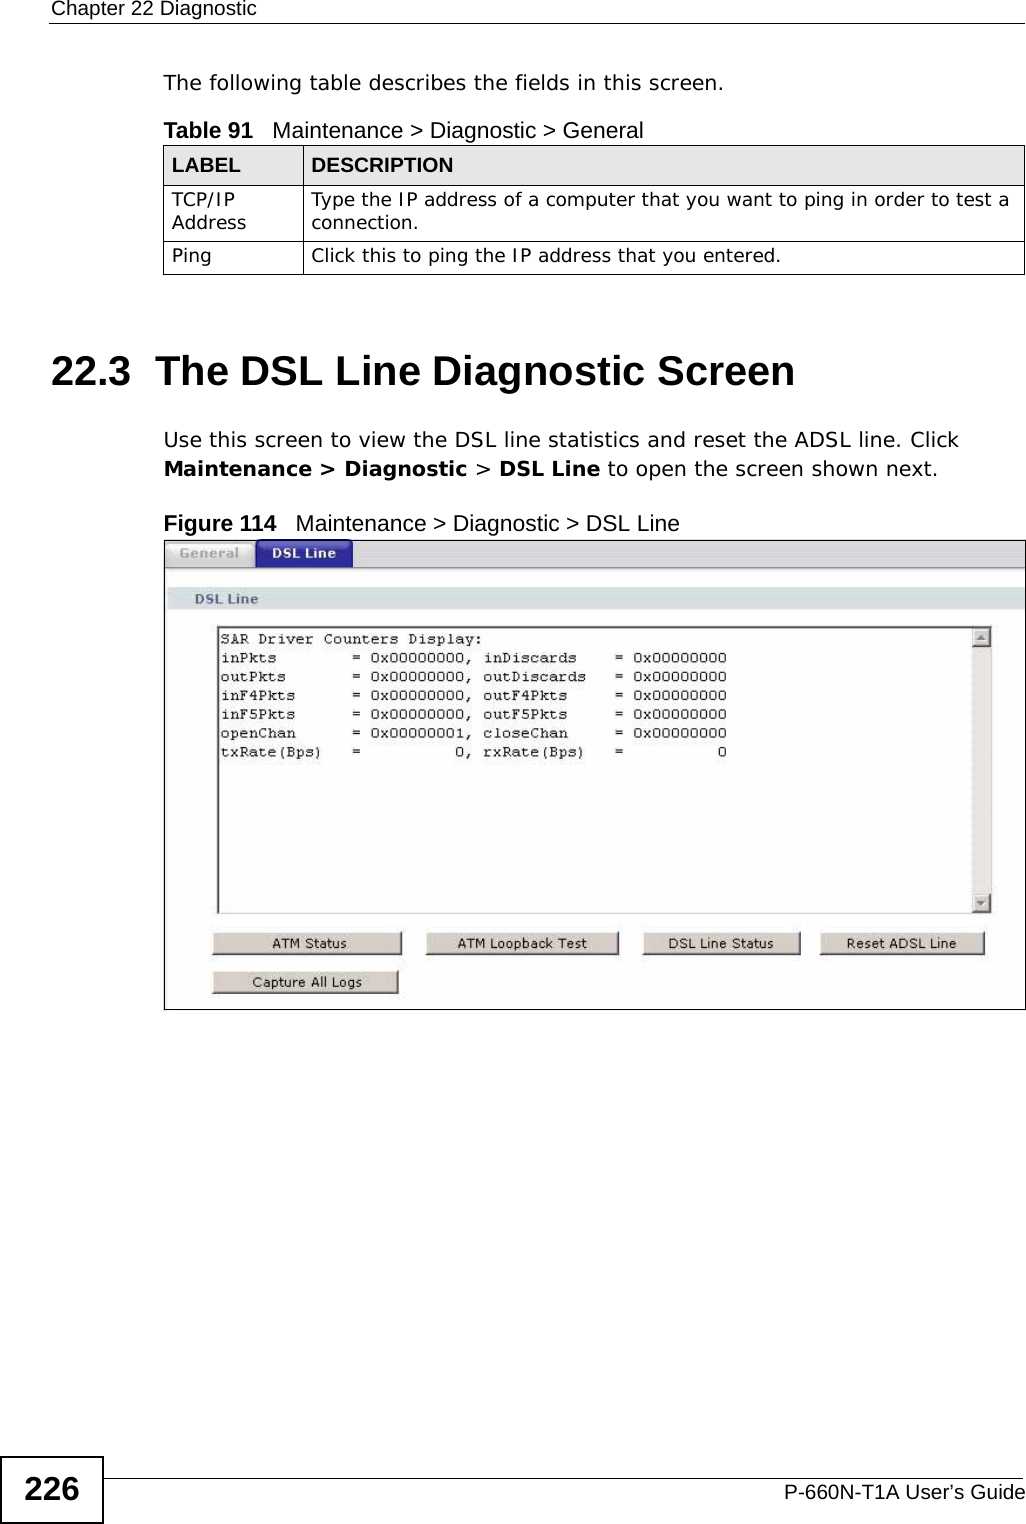 Chapter 22 DiagnosticP-660N-T1A User’s Guide226The following table describes the fields in this screen. 22.3  The DSL Line Diagnostic Screen Use this screen to view the DSL line statistics and reset the ADSL line. Click Maintenance &gt; Diagnostic &gt; DSL Line to open the screen shown next.Figure 114   Maintenance &gt; Diagnostic &gt; DSL LineTable 91   Maintenance &gt; Diagnostic &gt; GeneralLABEL DESCRIPTIONTCP/IP Address Type the IP address of a computer that you want to ping in order to test a connection.Ping Click this to ping the IP address that you entered.